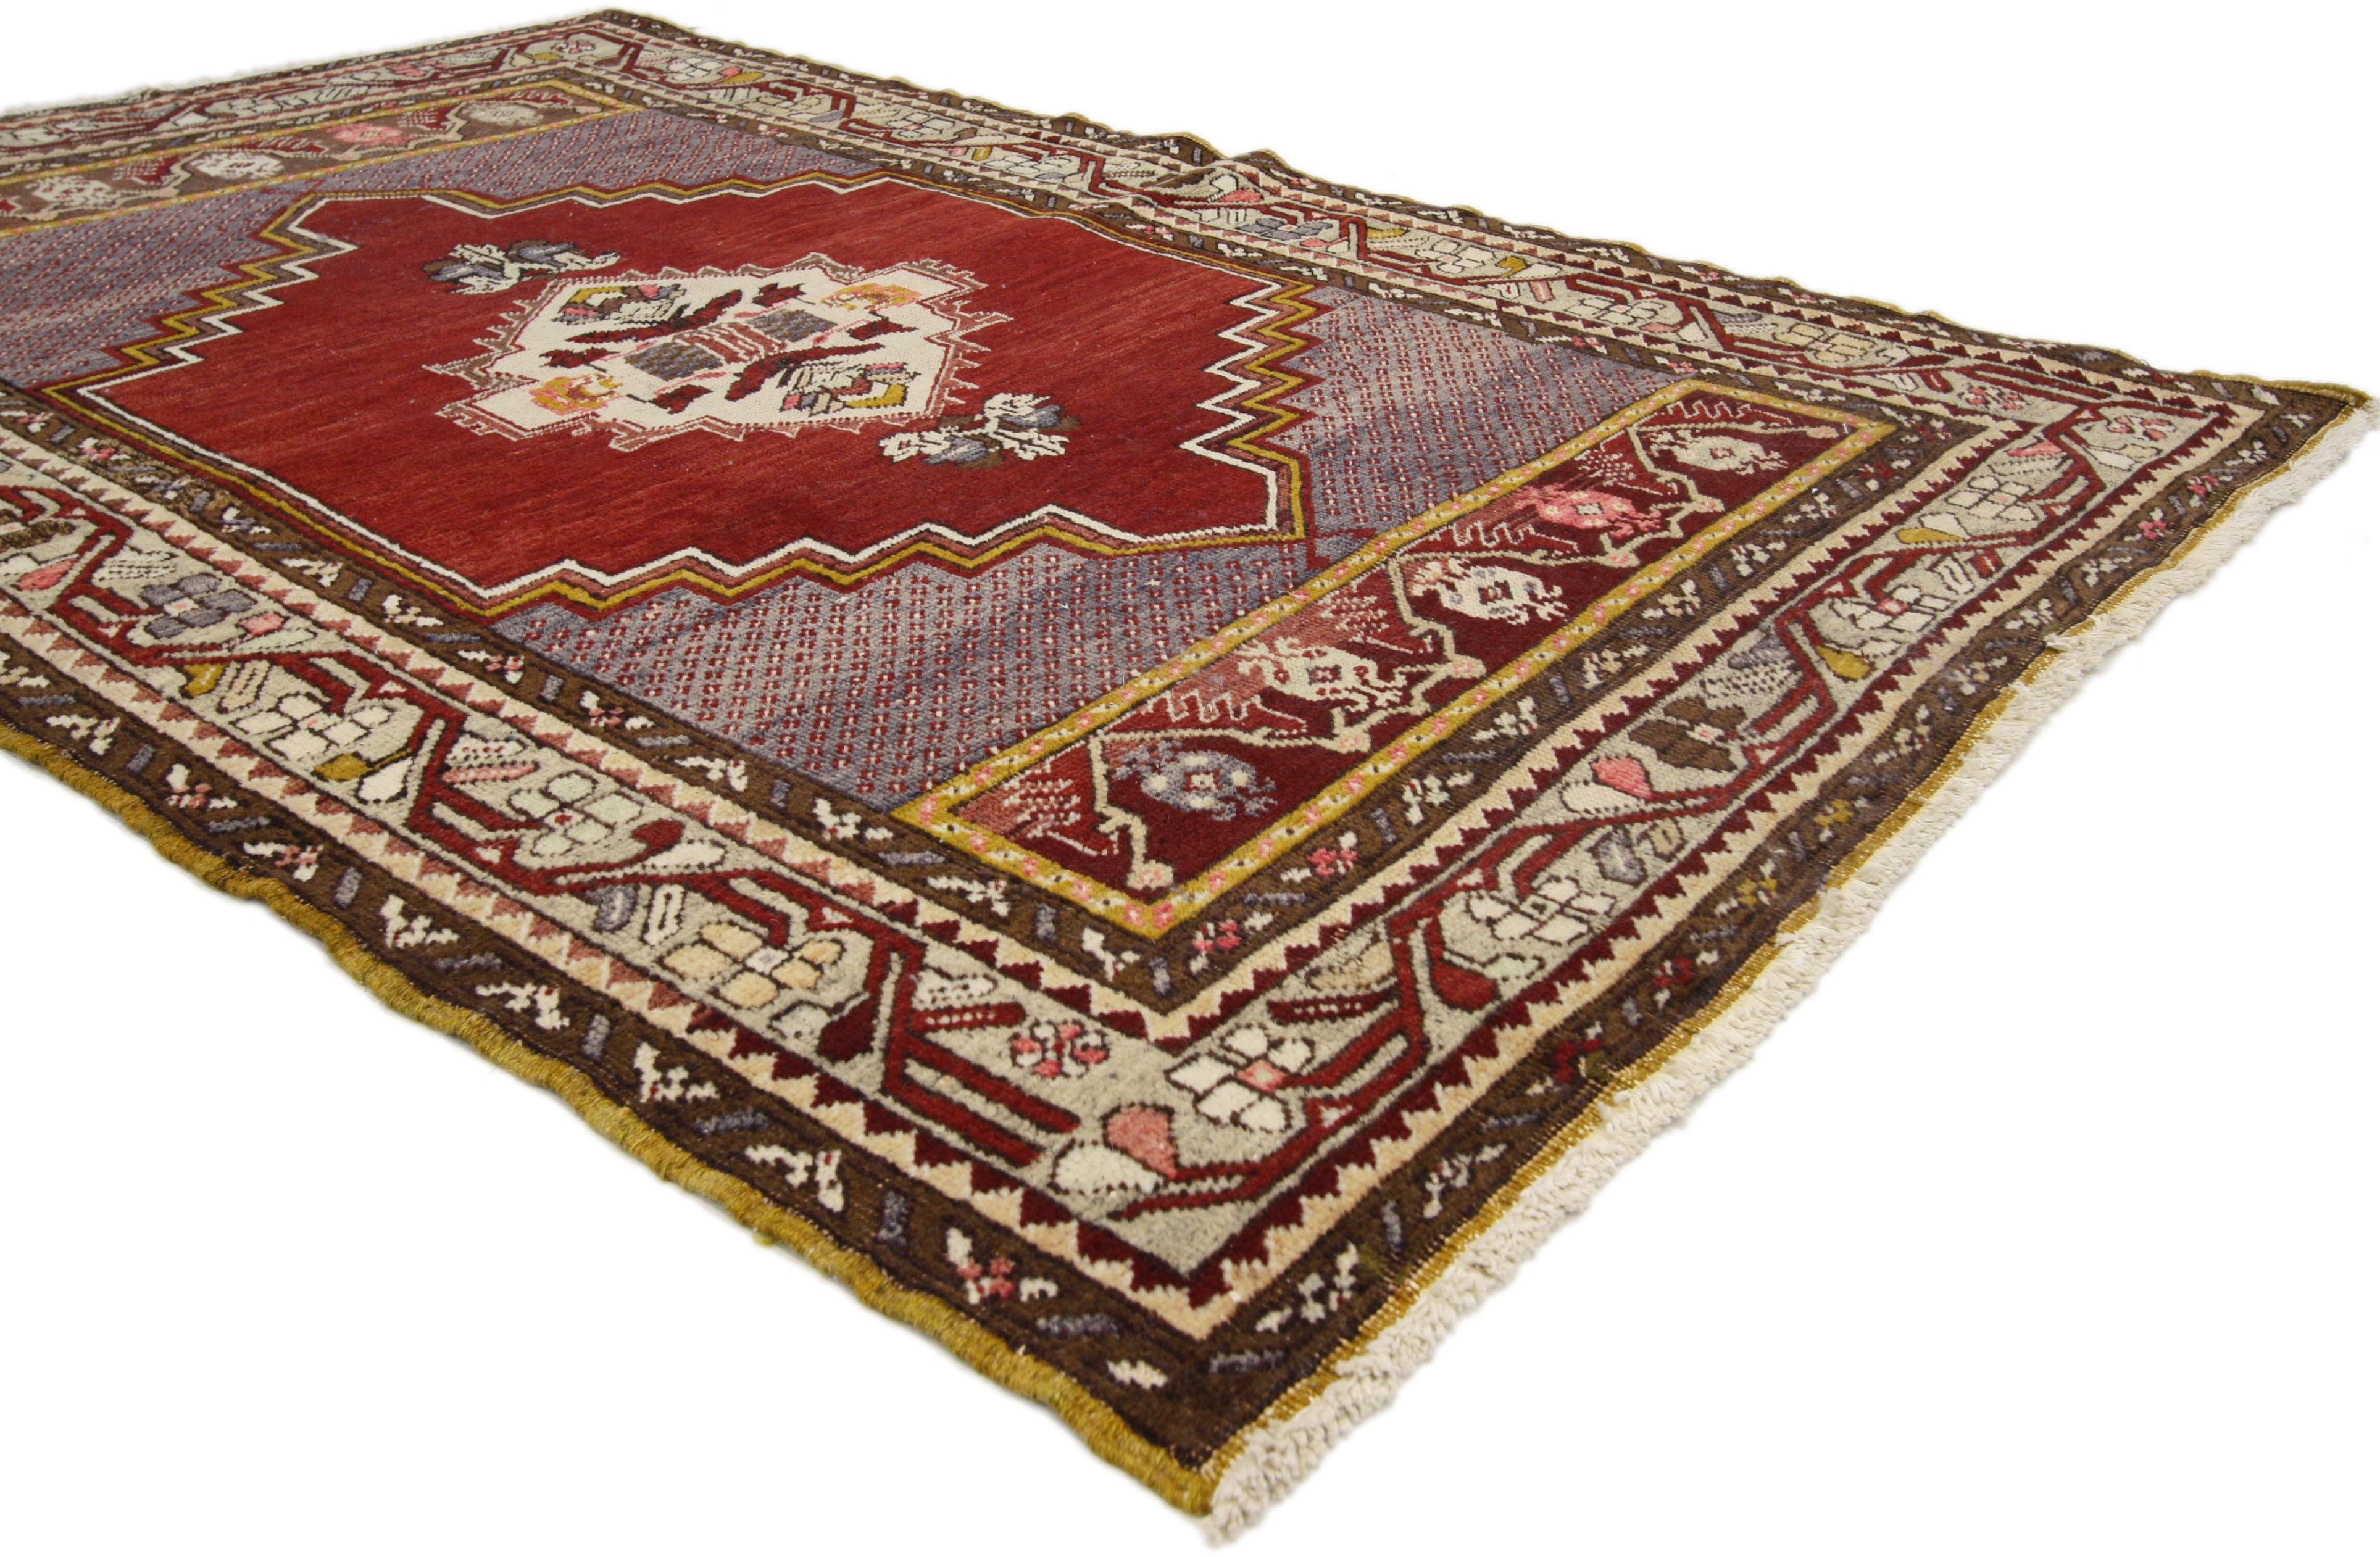 73866 Vintage Turkish Oushak Rug for Entry, Kitchen, Bathroom, or Foyer Rug 03'05 X 05'05. This vintage Turkish Oushak rug features a modern traditional style. Immersed in Anatolian history and refined colors, this vintage Turkish Oushak rug